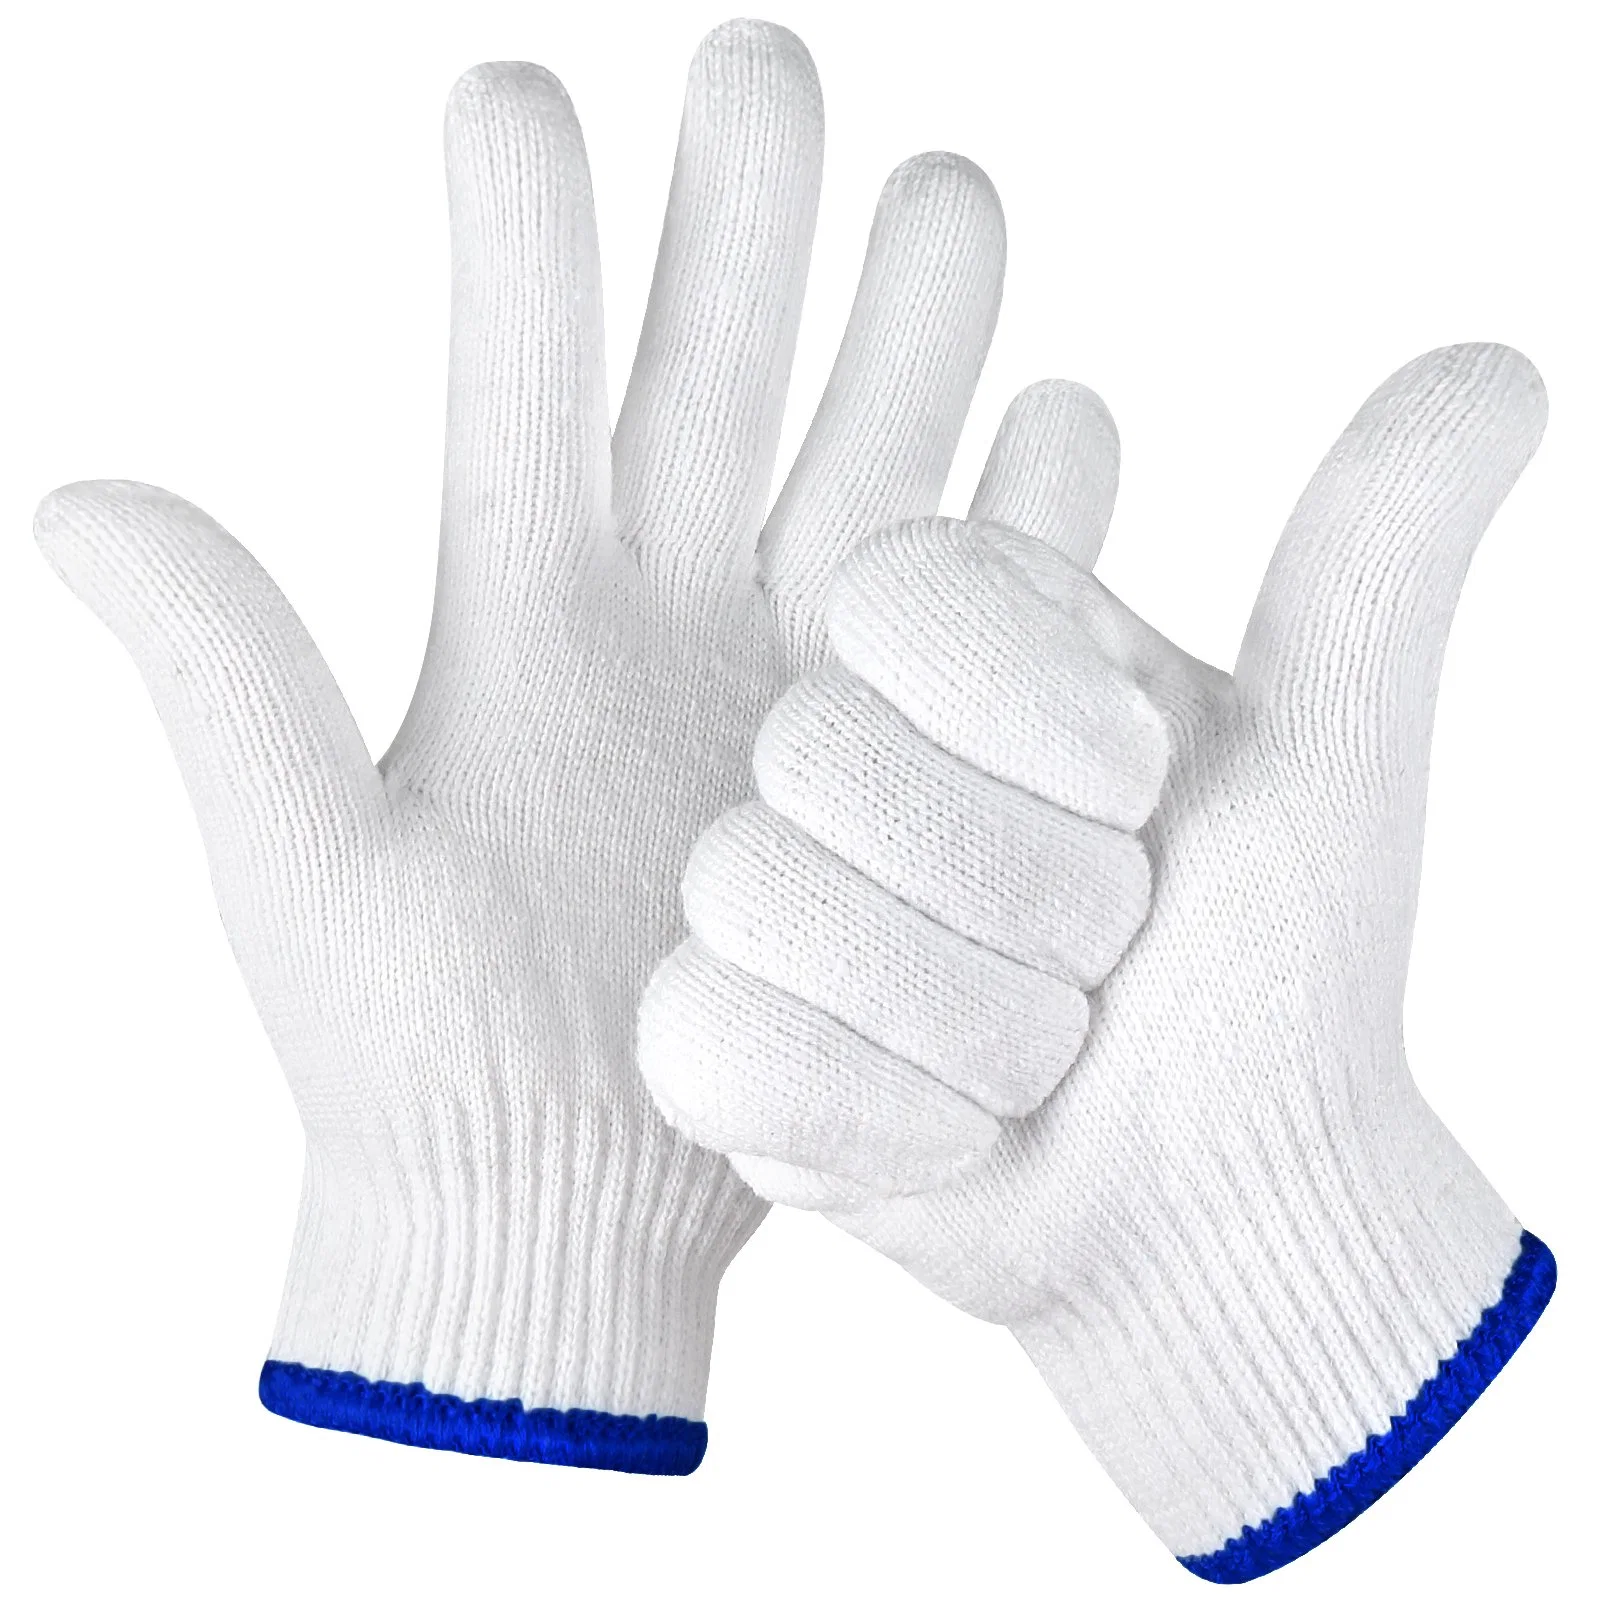 China Wholesale 7/10gauge White Mittens Safety/Work Glove Working Guantes Cotton Knitted Gloves